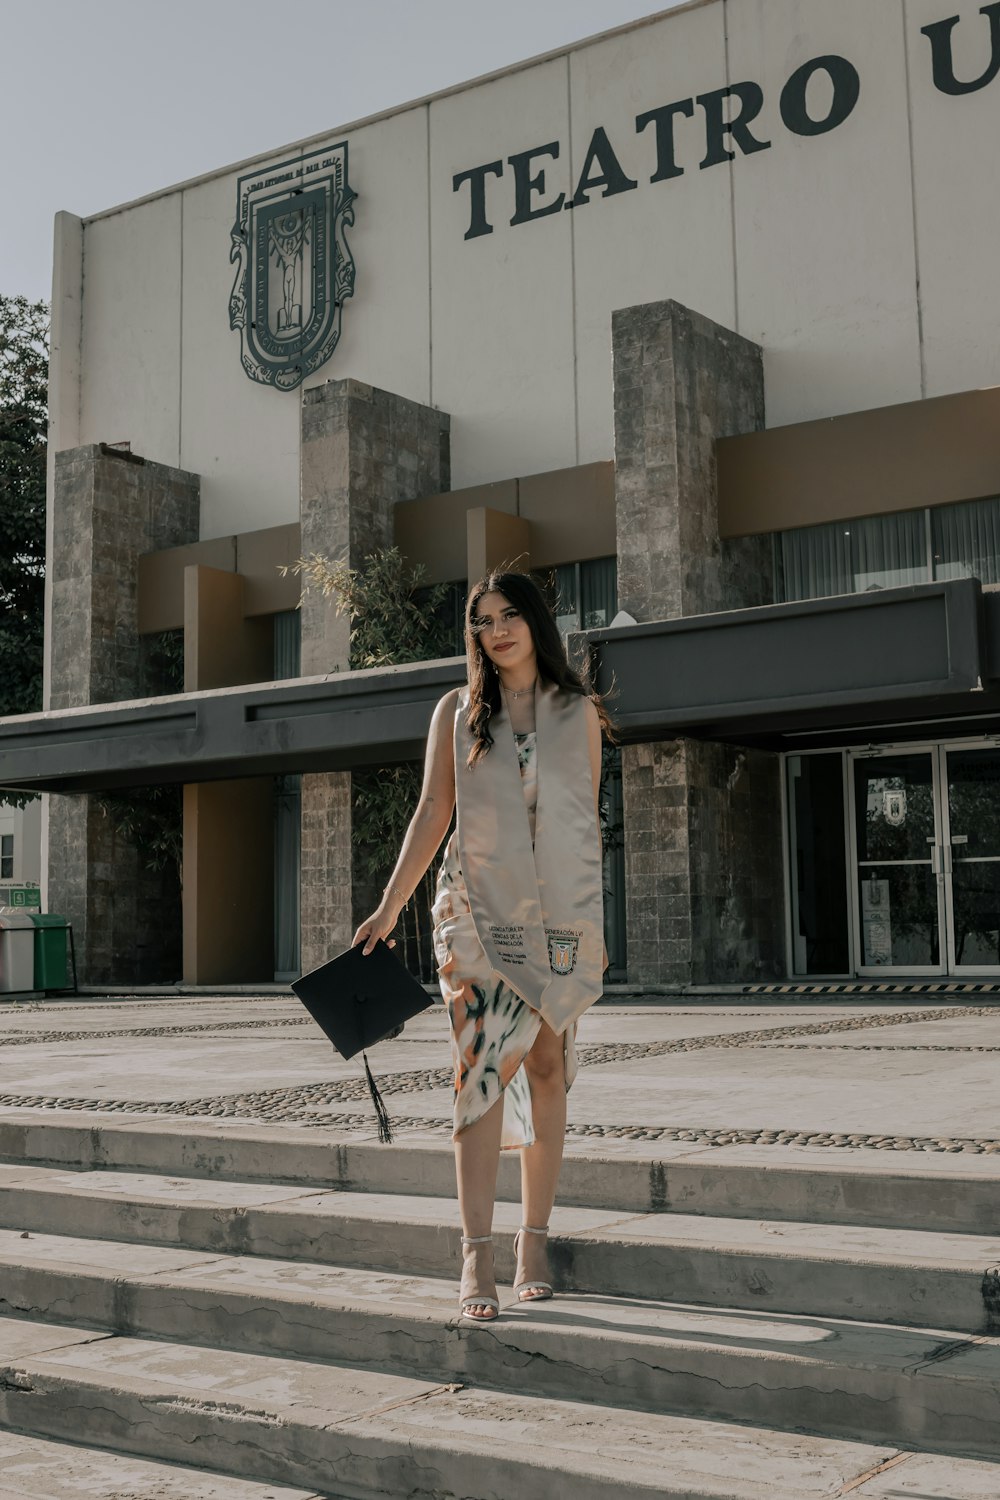 a woman walking down some steps in front of a building